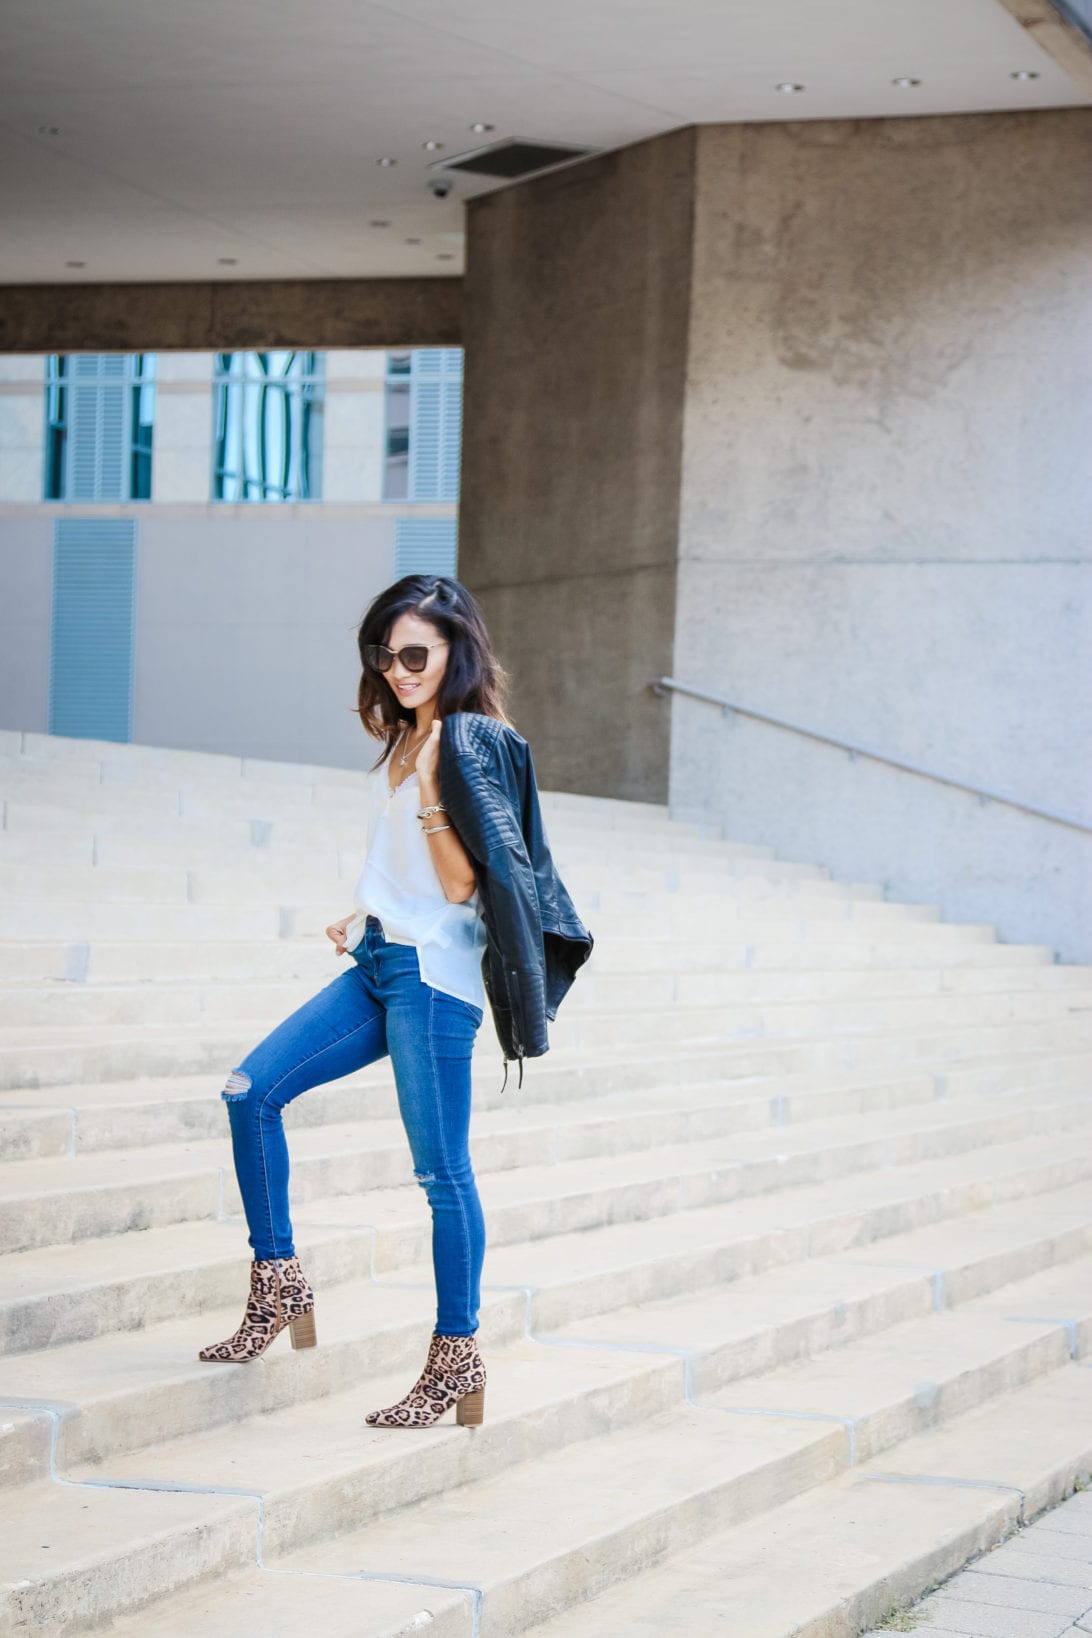 what to wear after Labor Day, Labor Day outfit, leather moto jacket, black leather jacket, moto jacket, ripped jeans, leopard booties, Prada sunglasses, statement booties, fall outfit